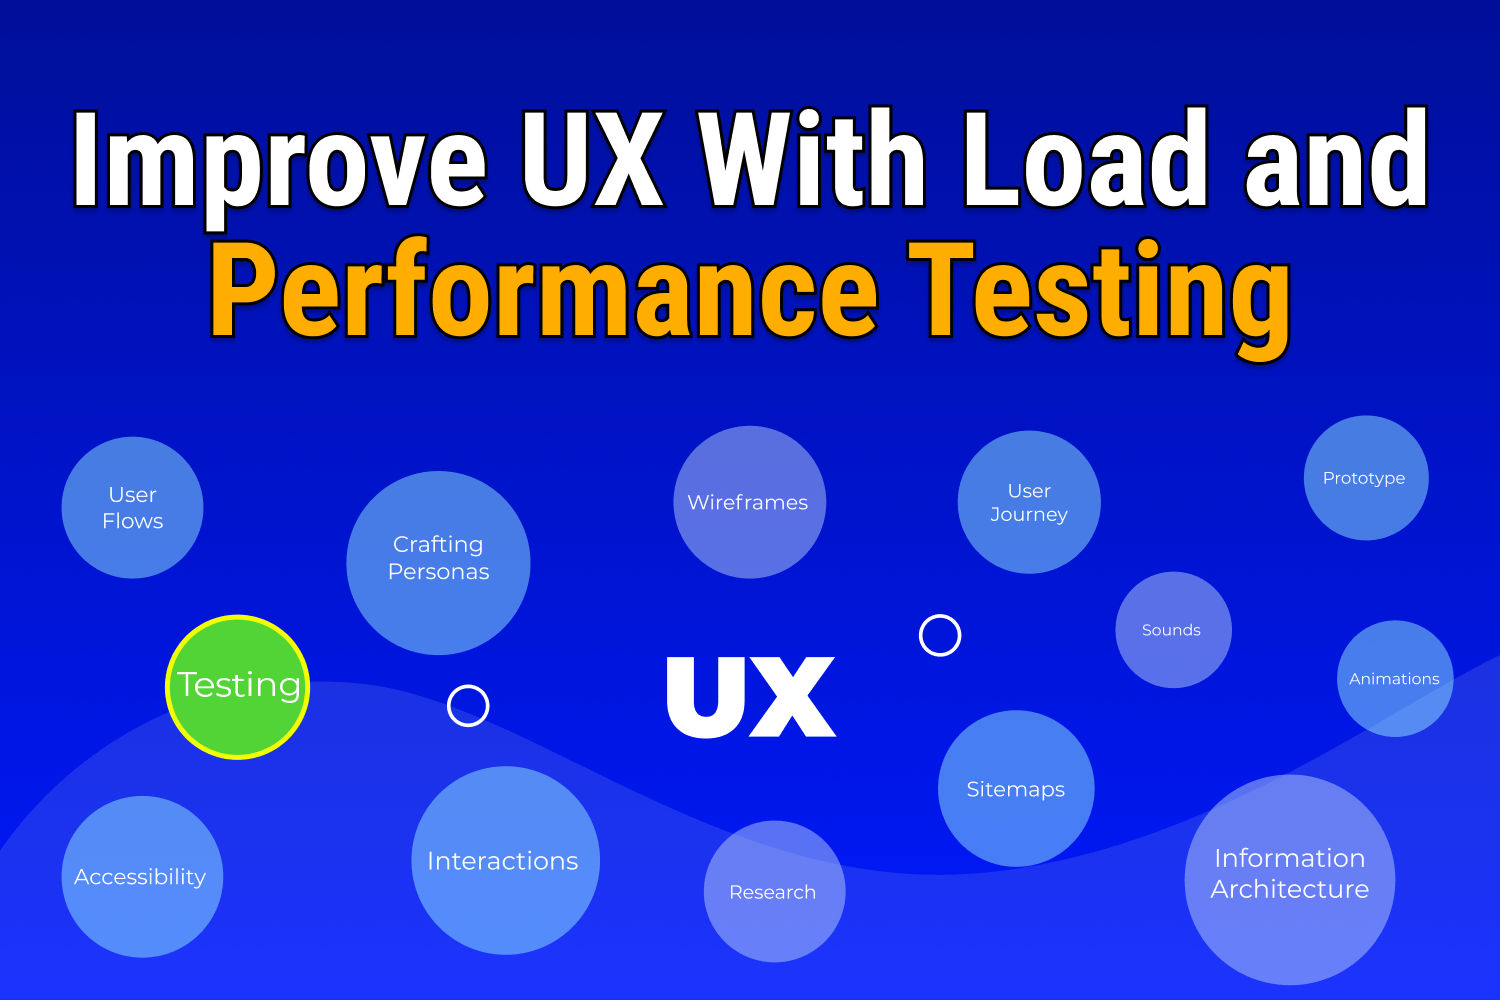 Improve UX With Load and Performance Testing